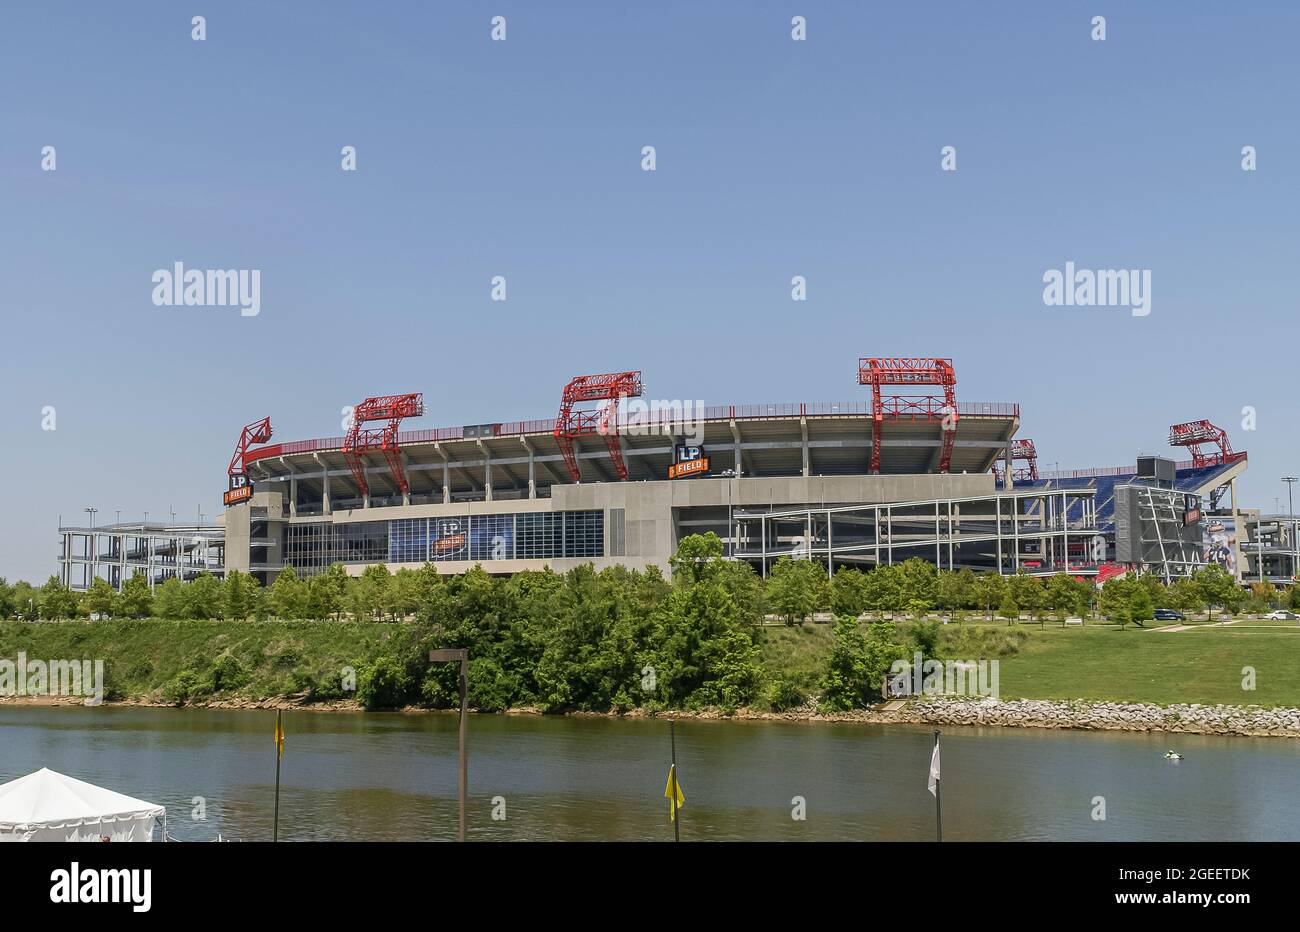 Nashville, TN, USA - May 19, 2007: Downtown. Giant LP Field Stadium, Nissan since 2015, where NFL Titans play under blue sky with green foliage and Cu Stock Photo